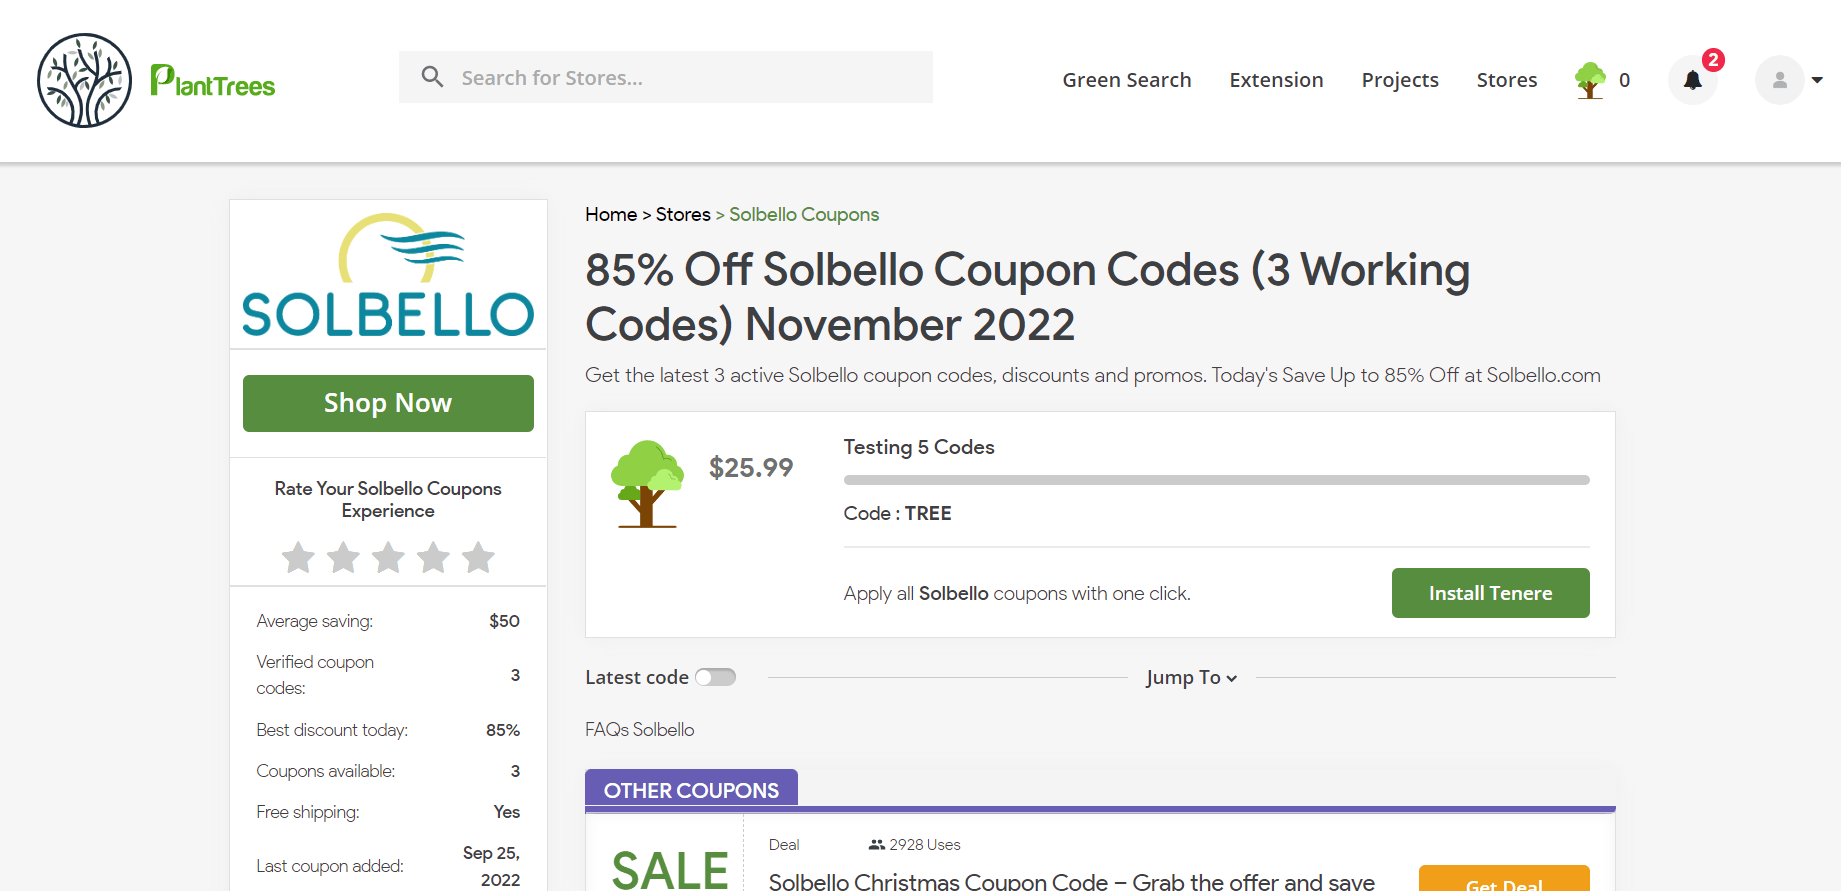 How to use Solbello coupon 2